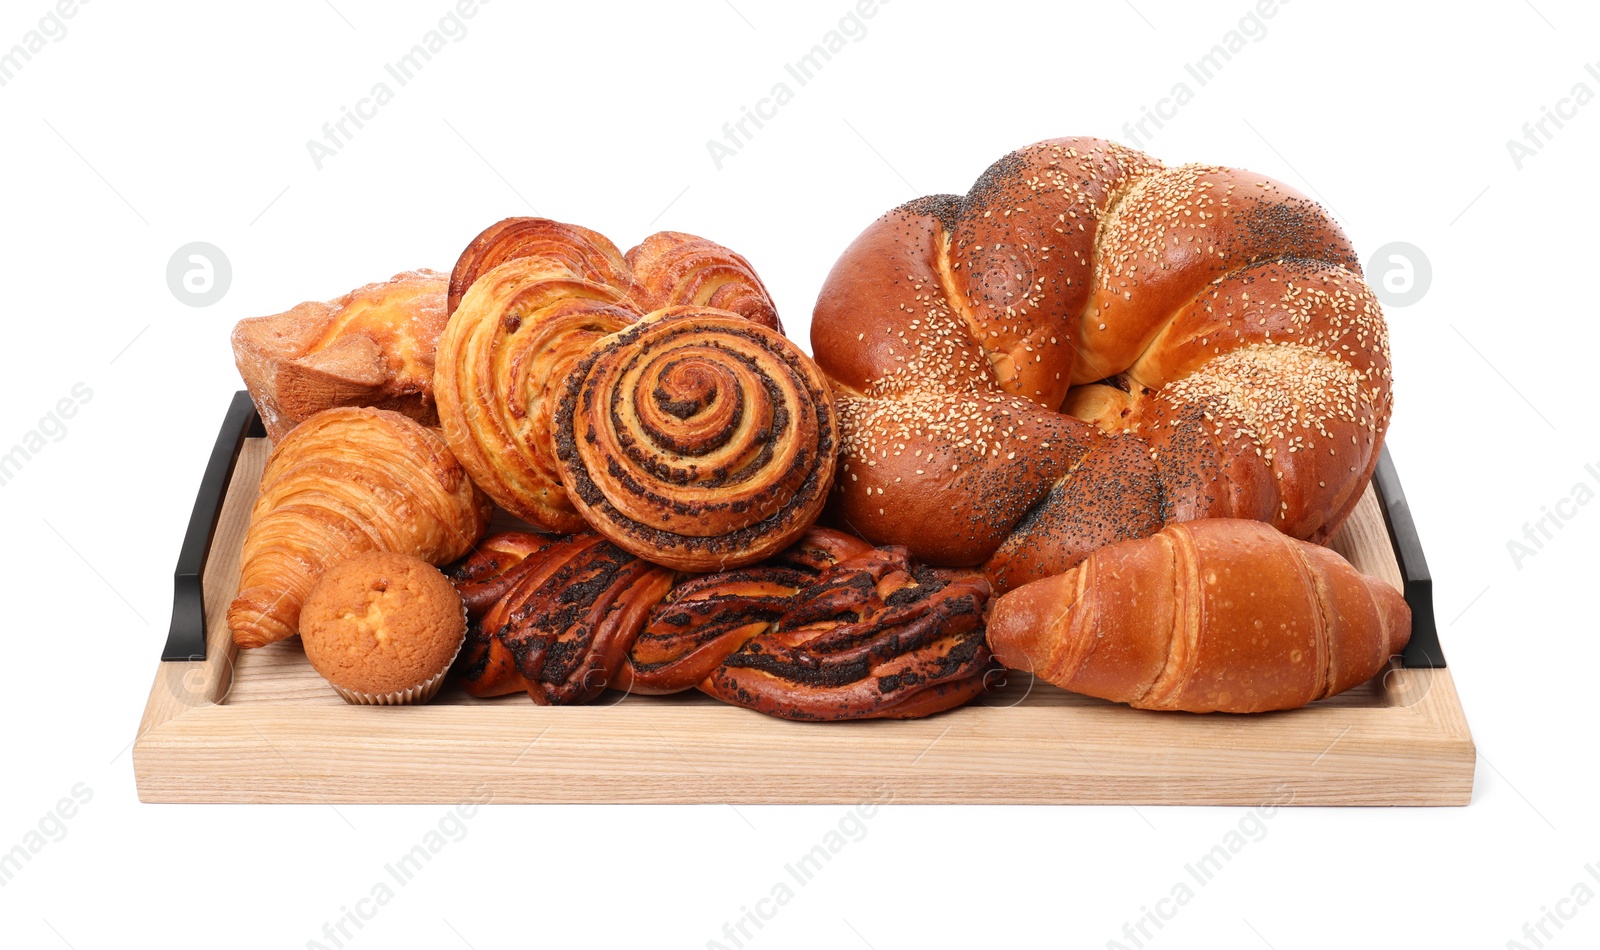 Photo of Wooden tray with different pastries isolated on white